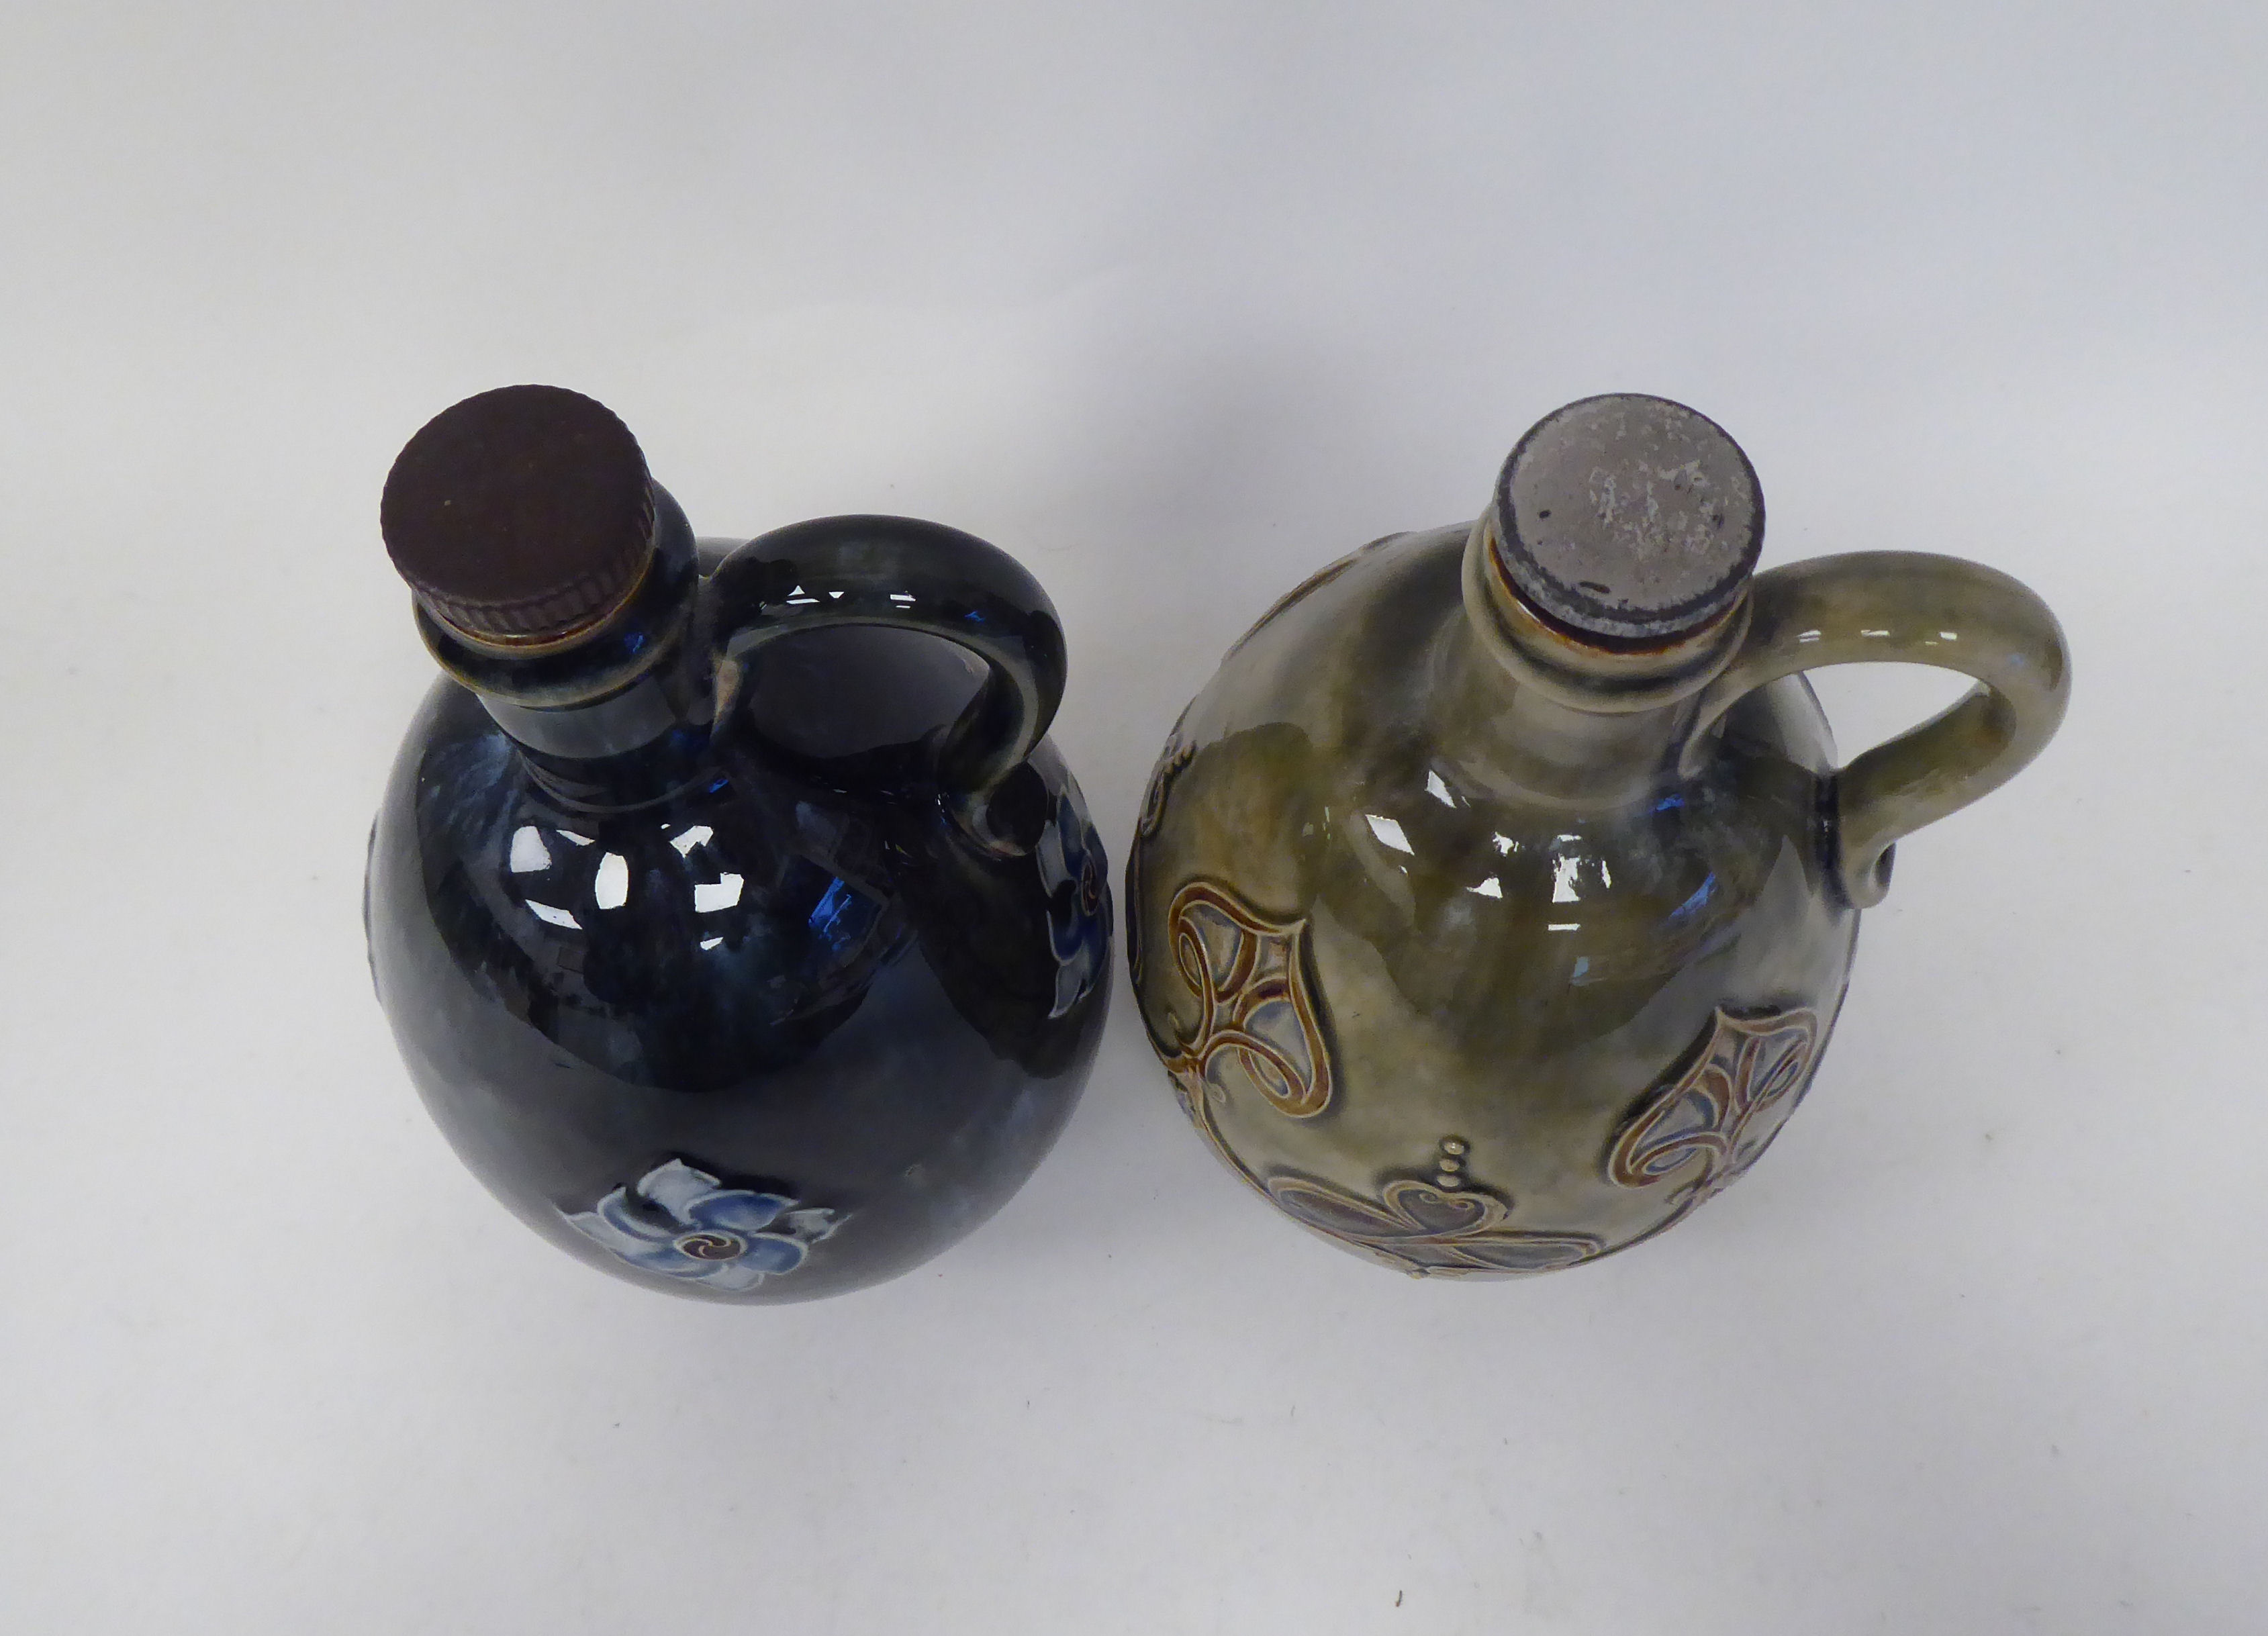 Two similar Royal Doulton stoneware ovoid shape liqueur decanters with strap handles, decorated in - Image 5 of 7